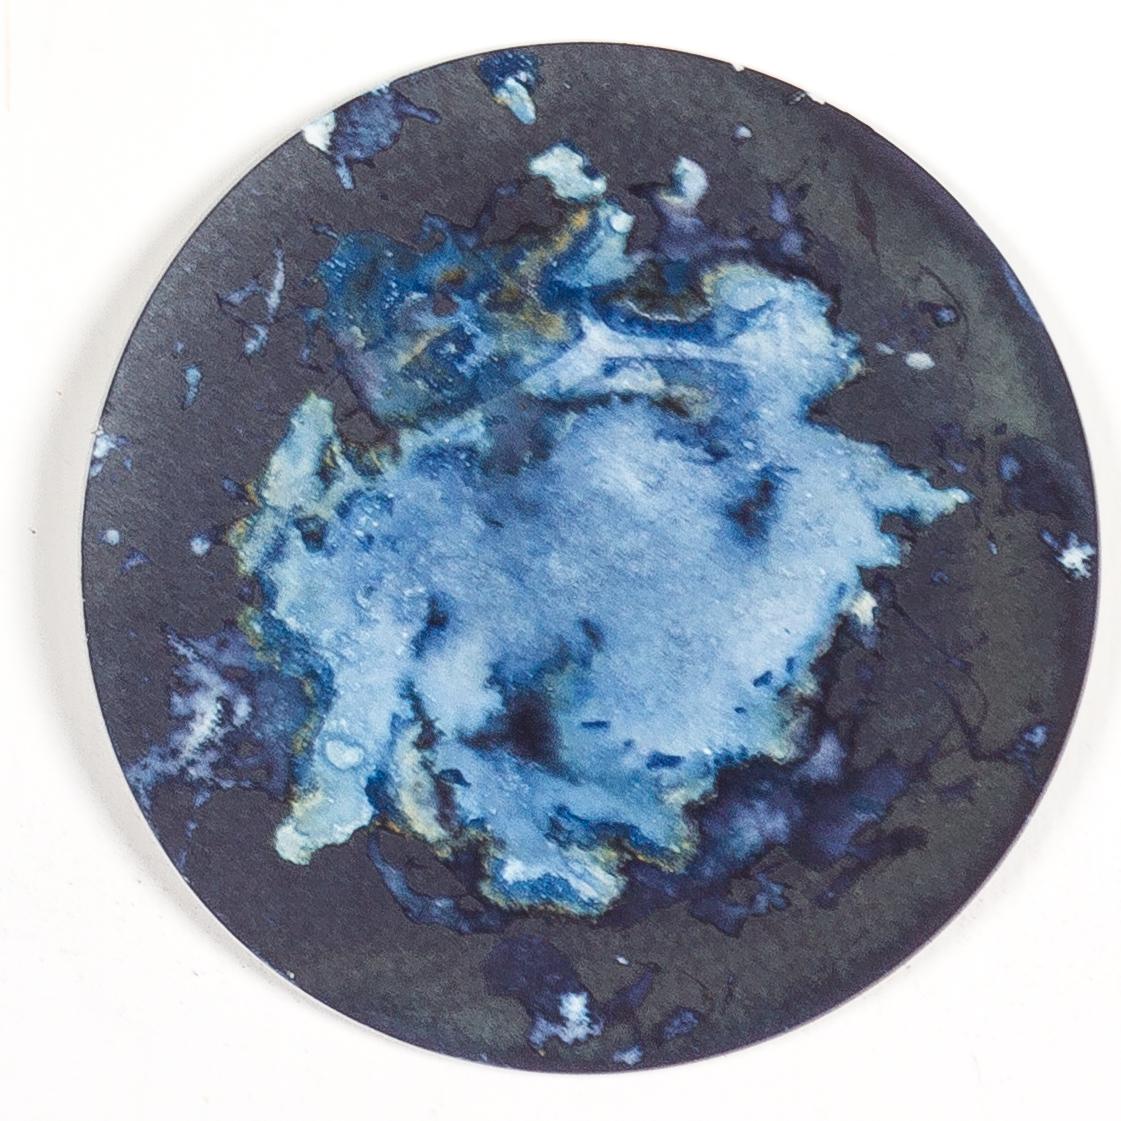 Algas 14, 41 y 68. Cyanotype photograhs mounted in high resistance glass dish - Abstract Photograph by Paola Davila